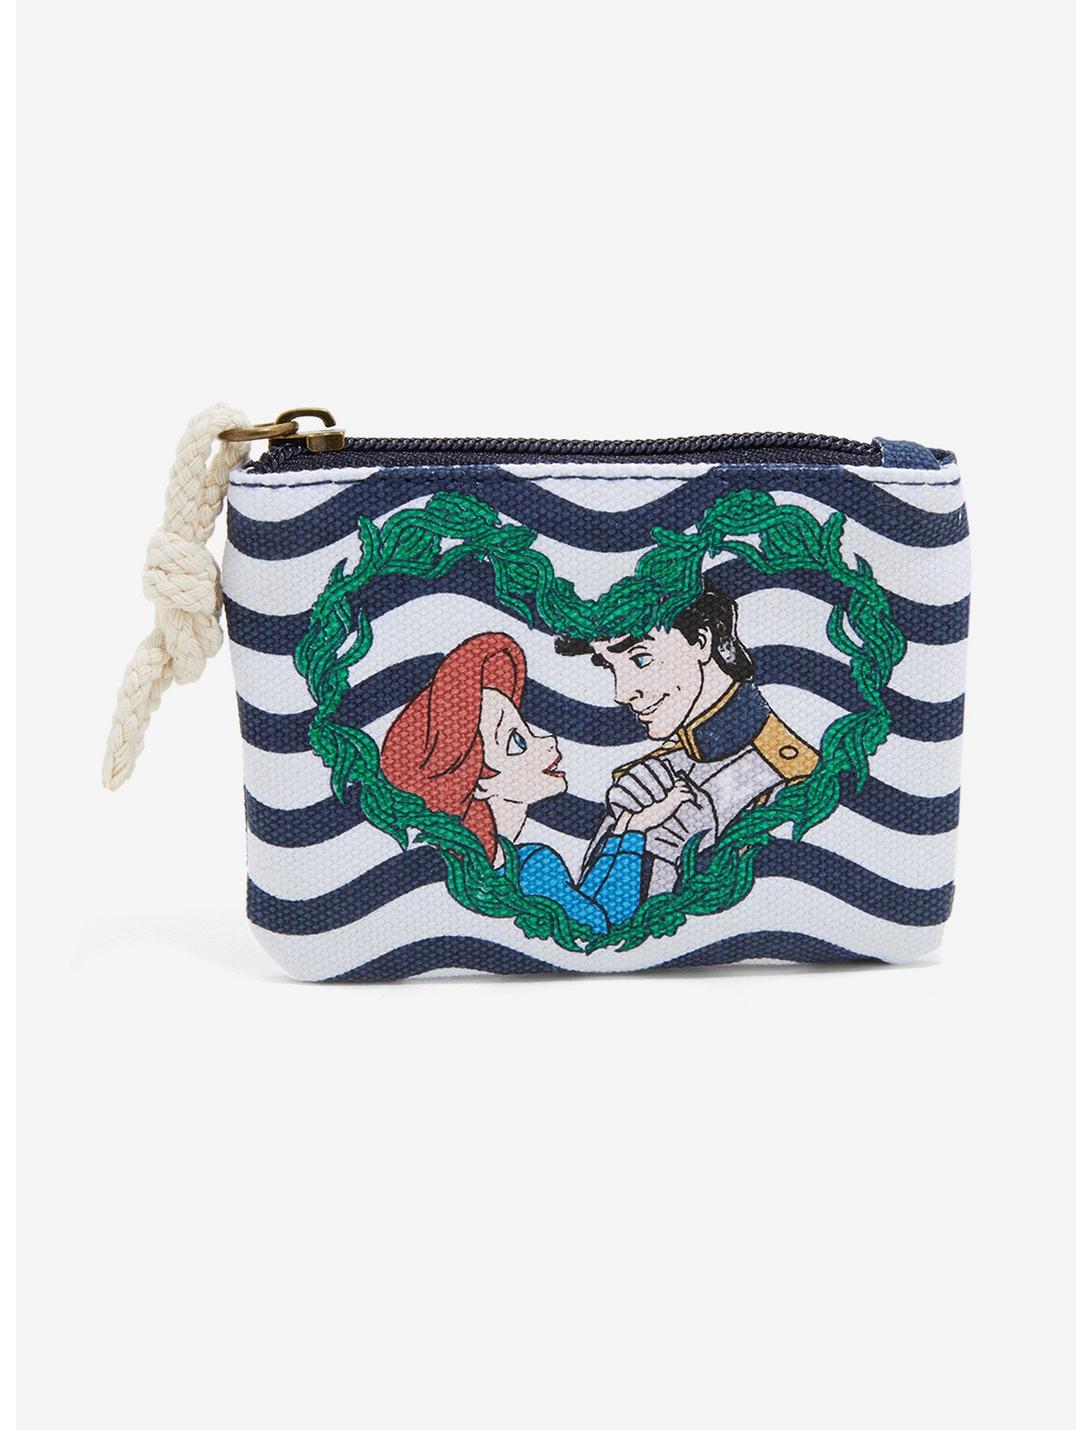 Loungefly Disney The Little Mermaid Nautical Coin Purse - BoxLunch Exclusive, , hi-res